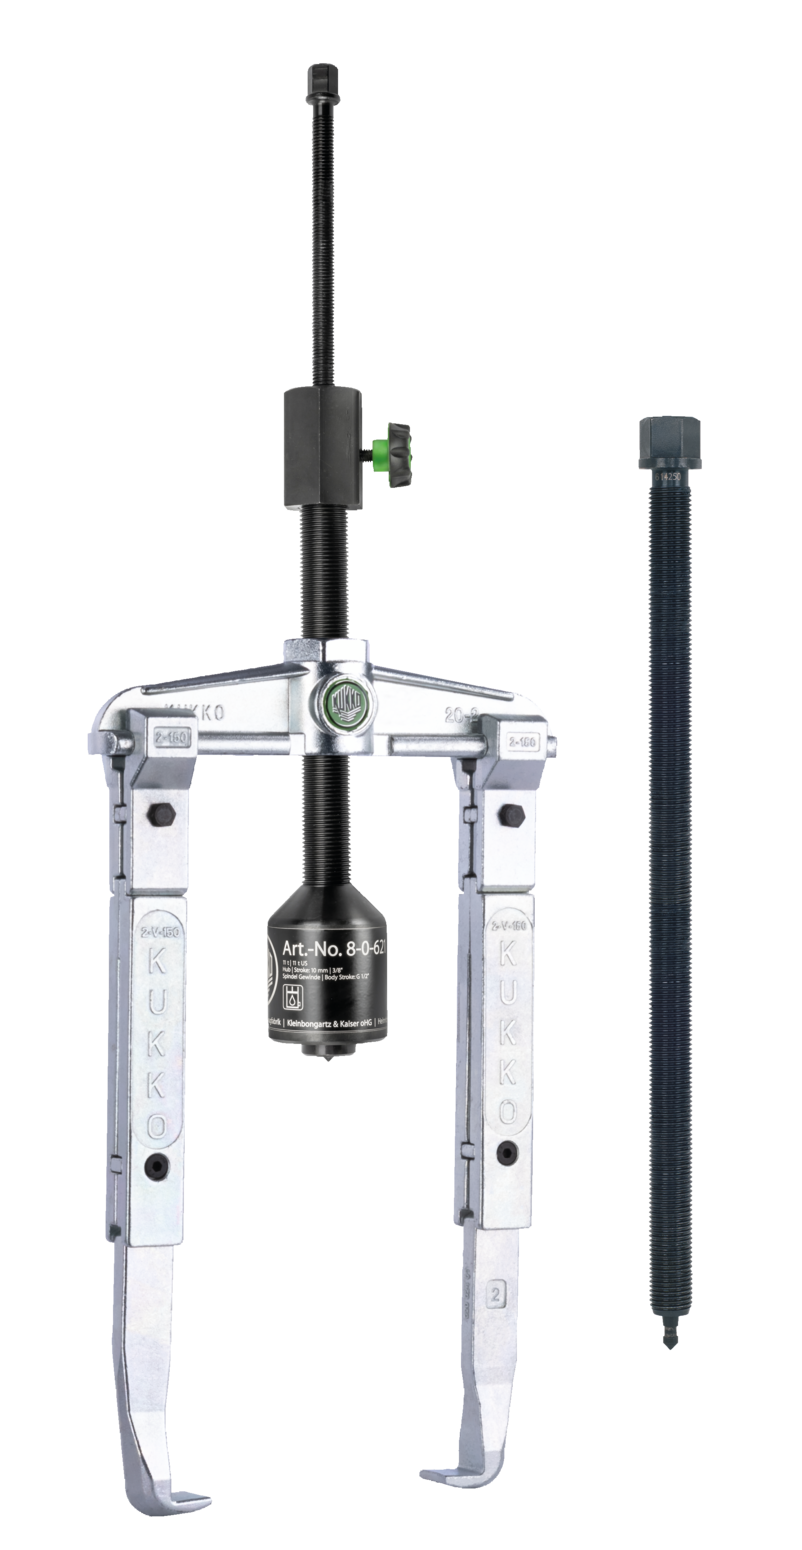 A 2-arm universal puller of the 20-Classic-B series with adjustable puller hooks and grease-hydraulic spindle